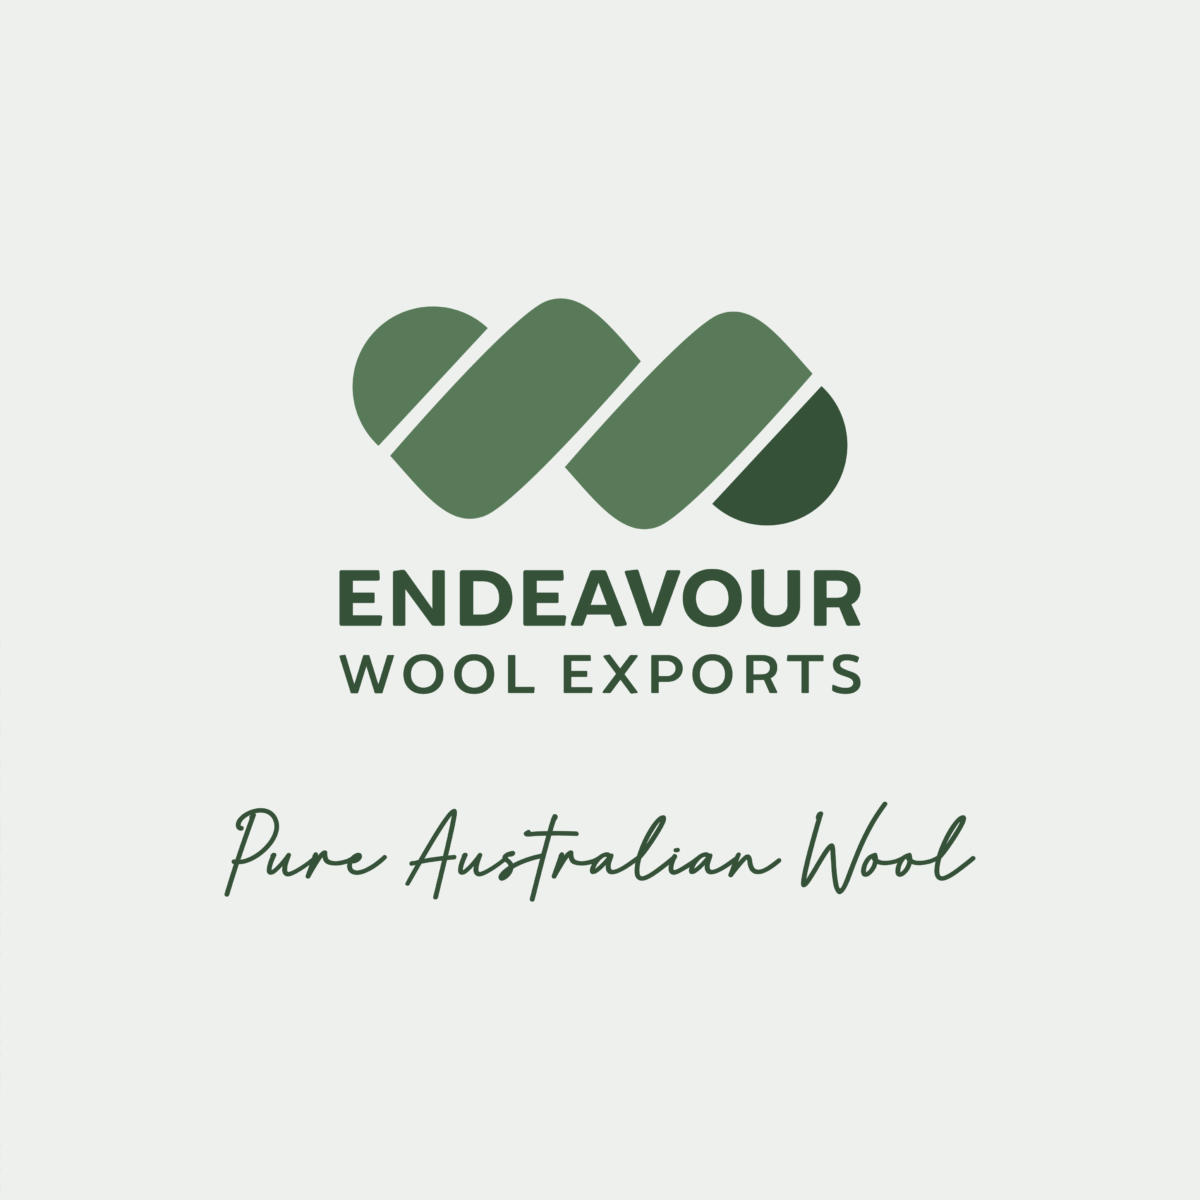 Endeavour Wool Exports Brand Design